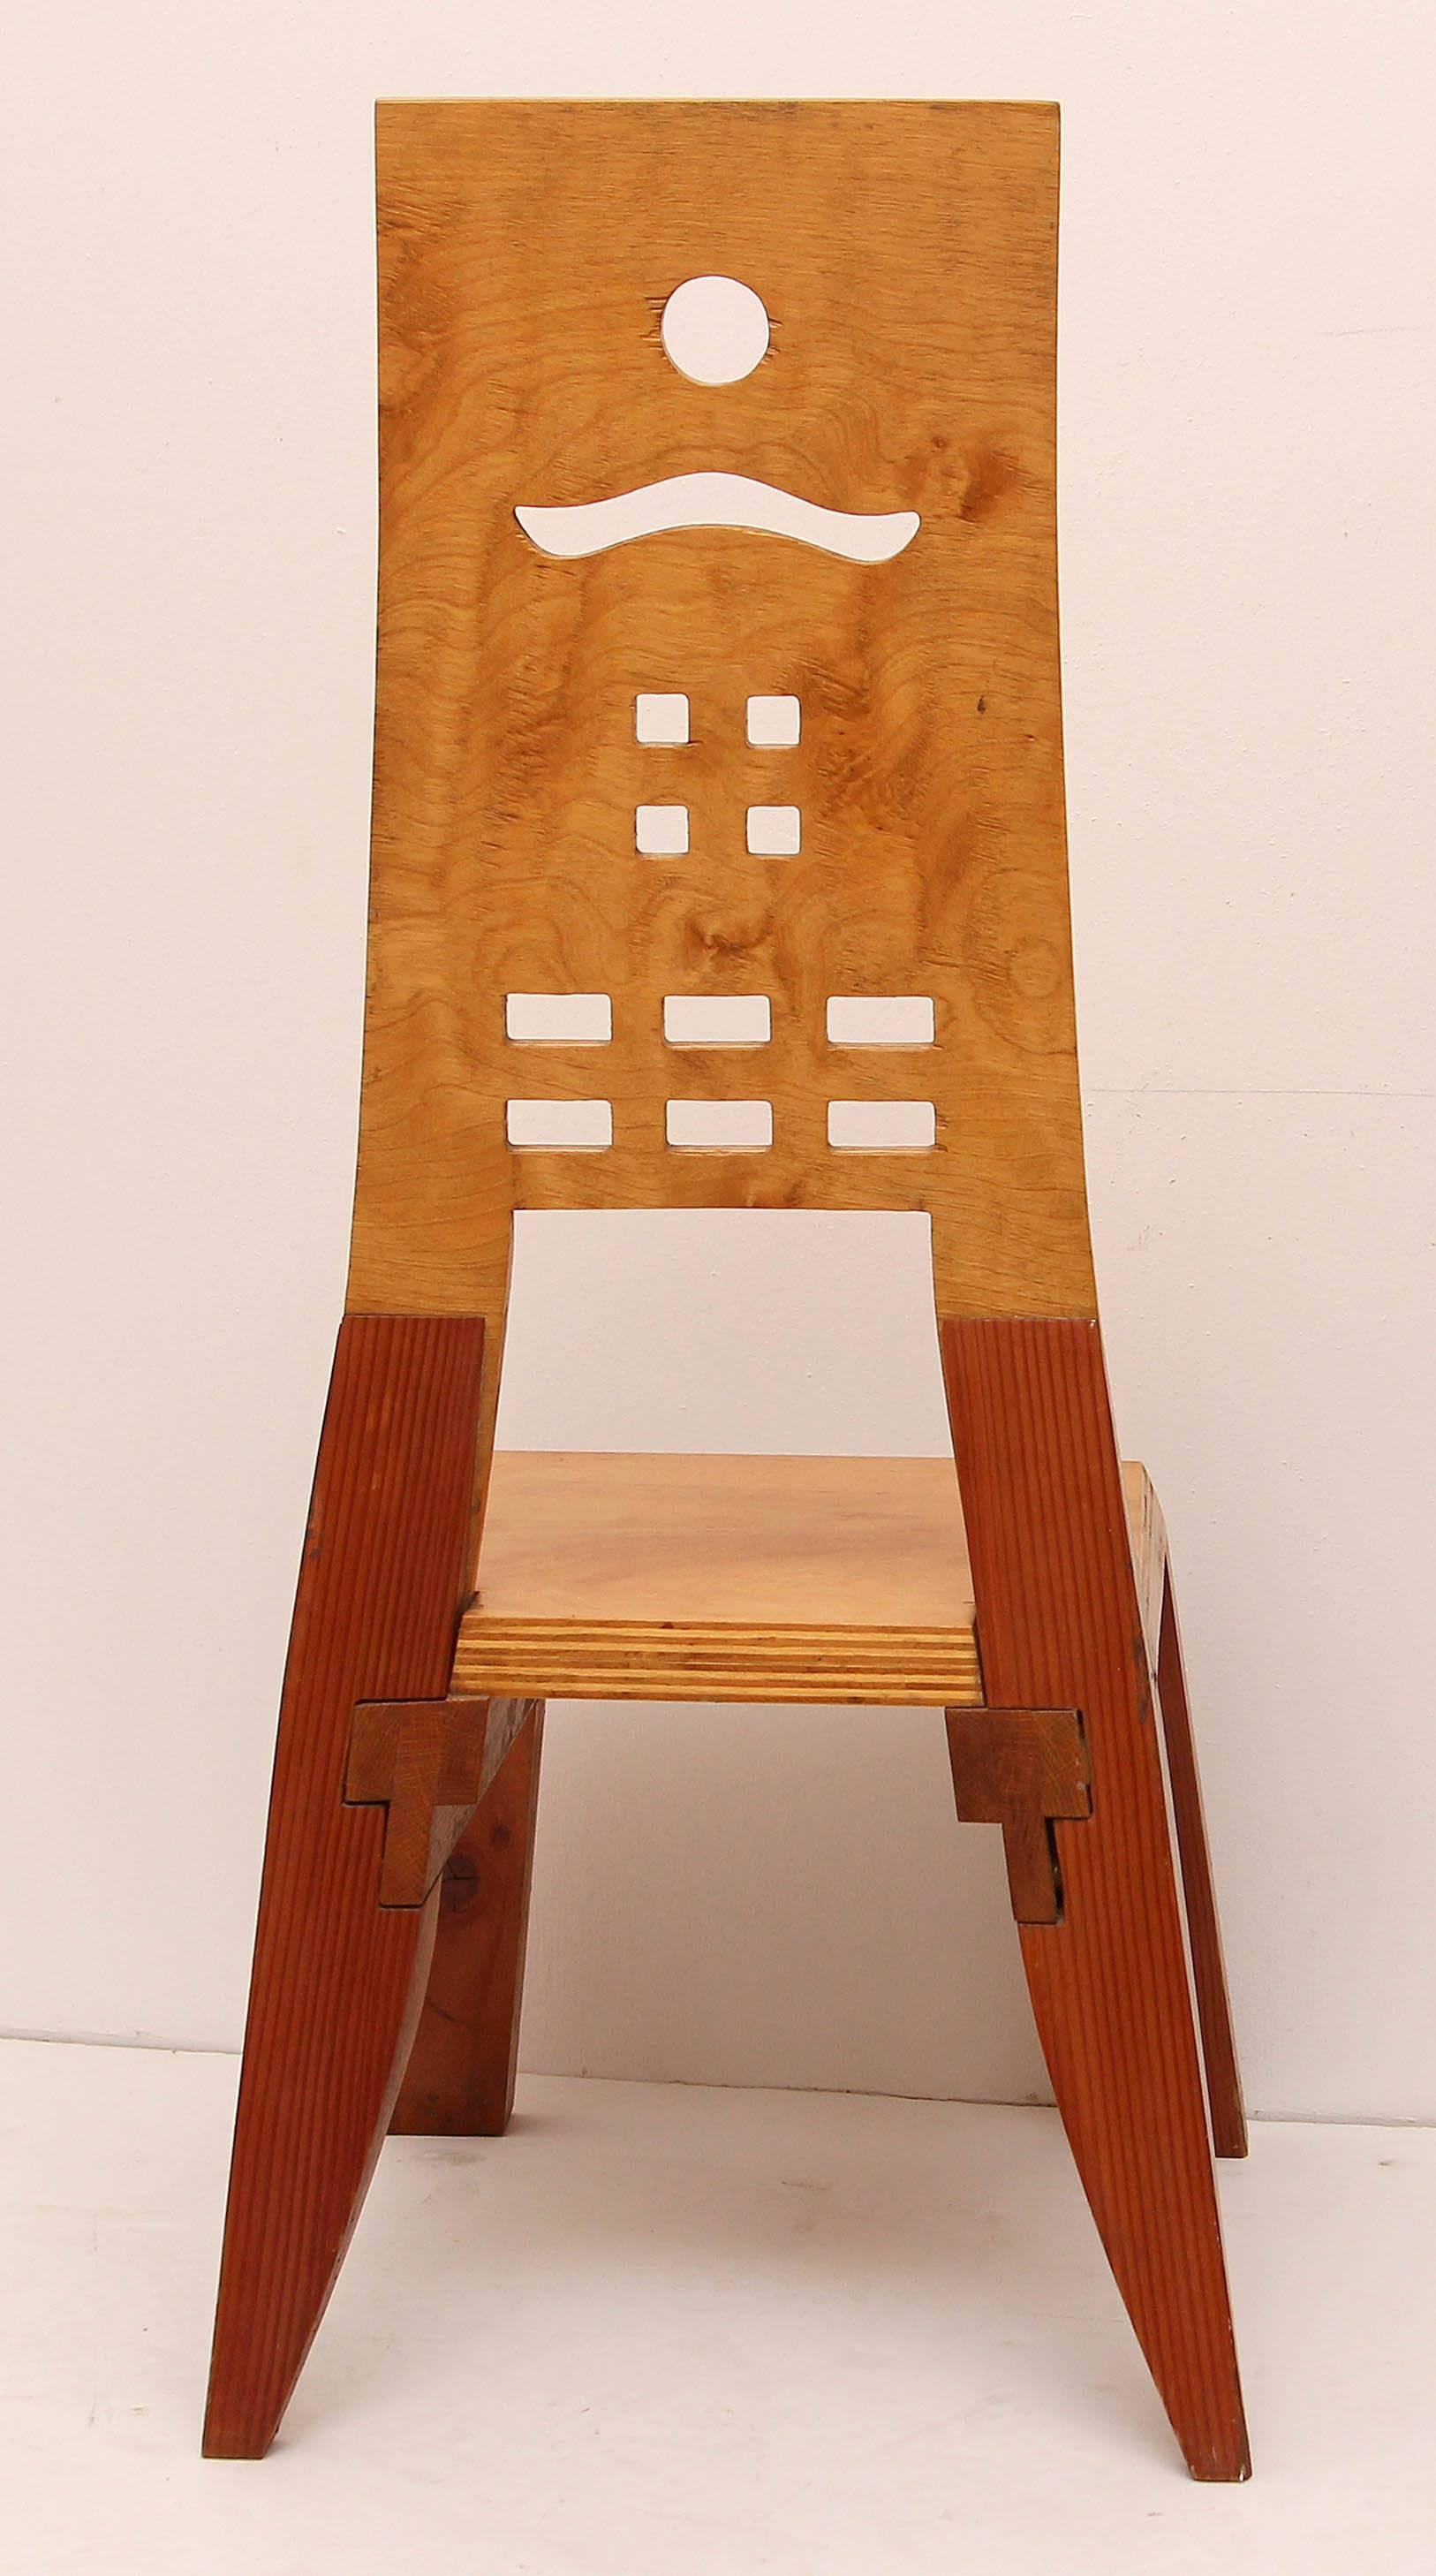 Memphis style chair. Handmade. Yellow pine and plywood.